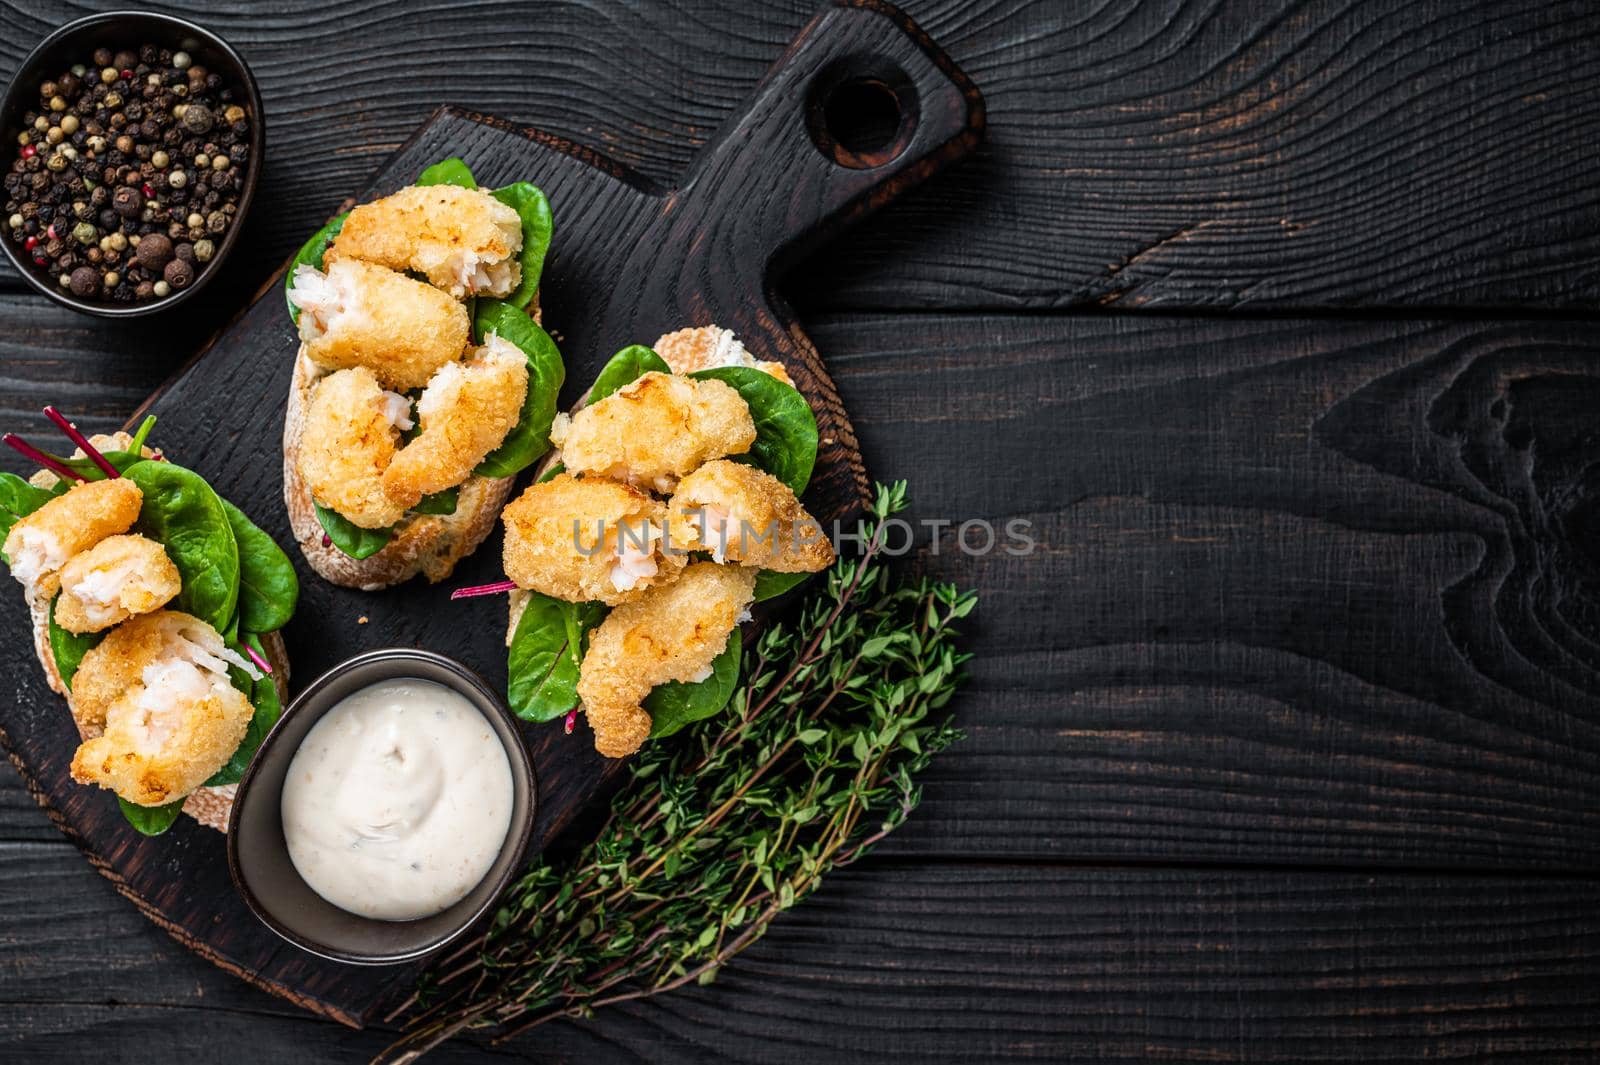 Toasts with Crispy Fried Shrimps Prawns and green salad on a wooden board. Black wooden background. Top view. Copy space by Composter